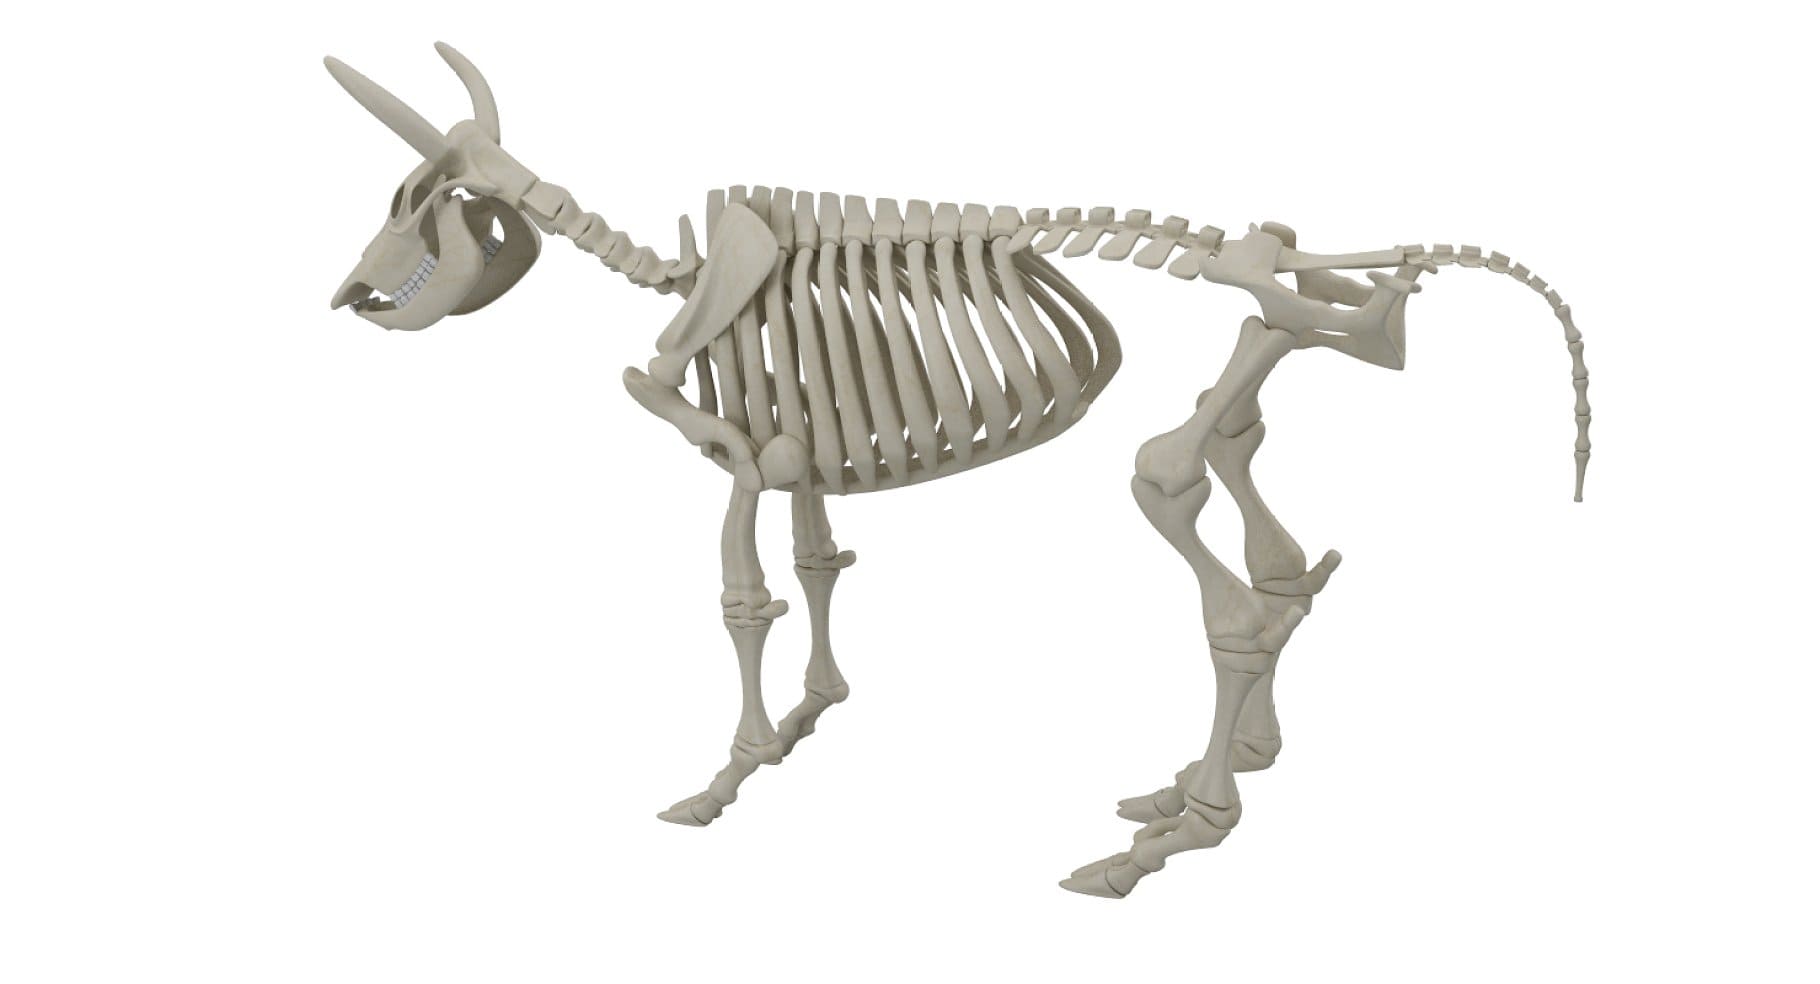 Image of the skeletal structure of cattle.